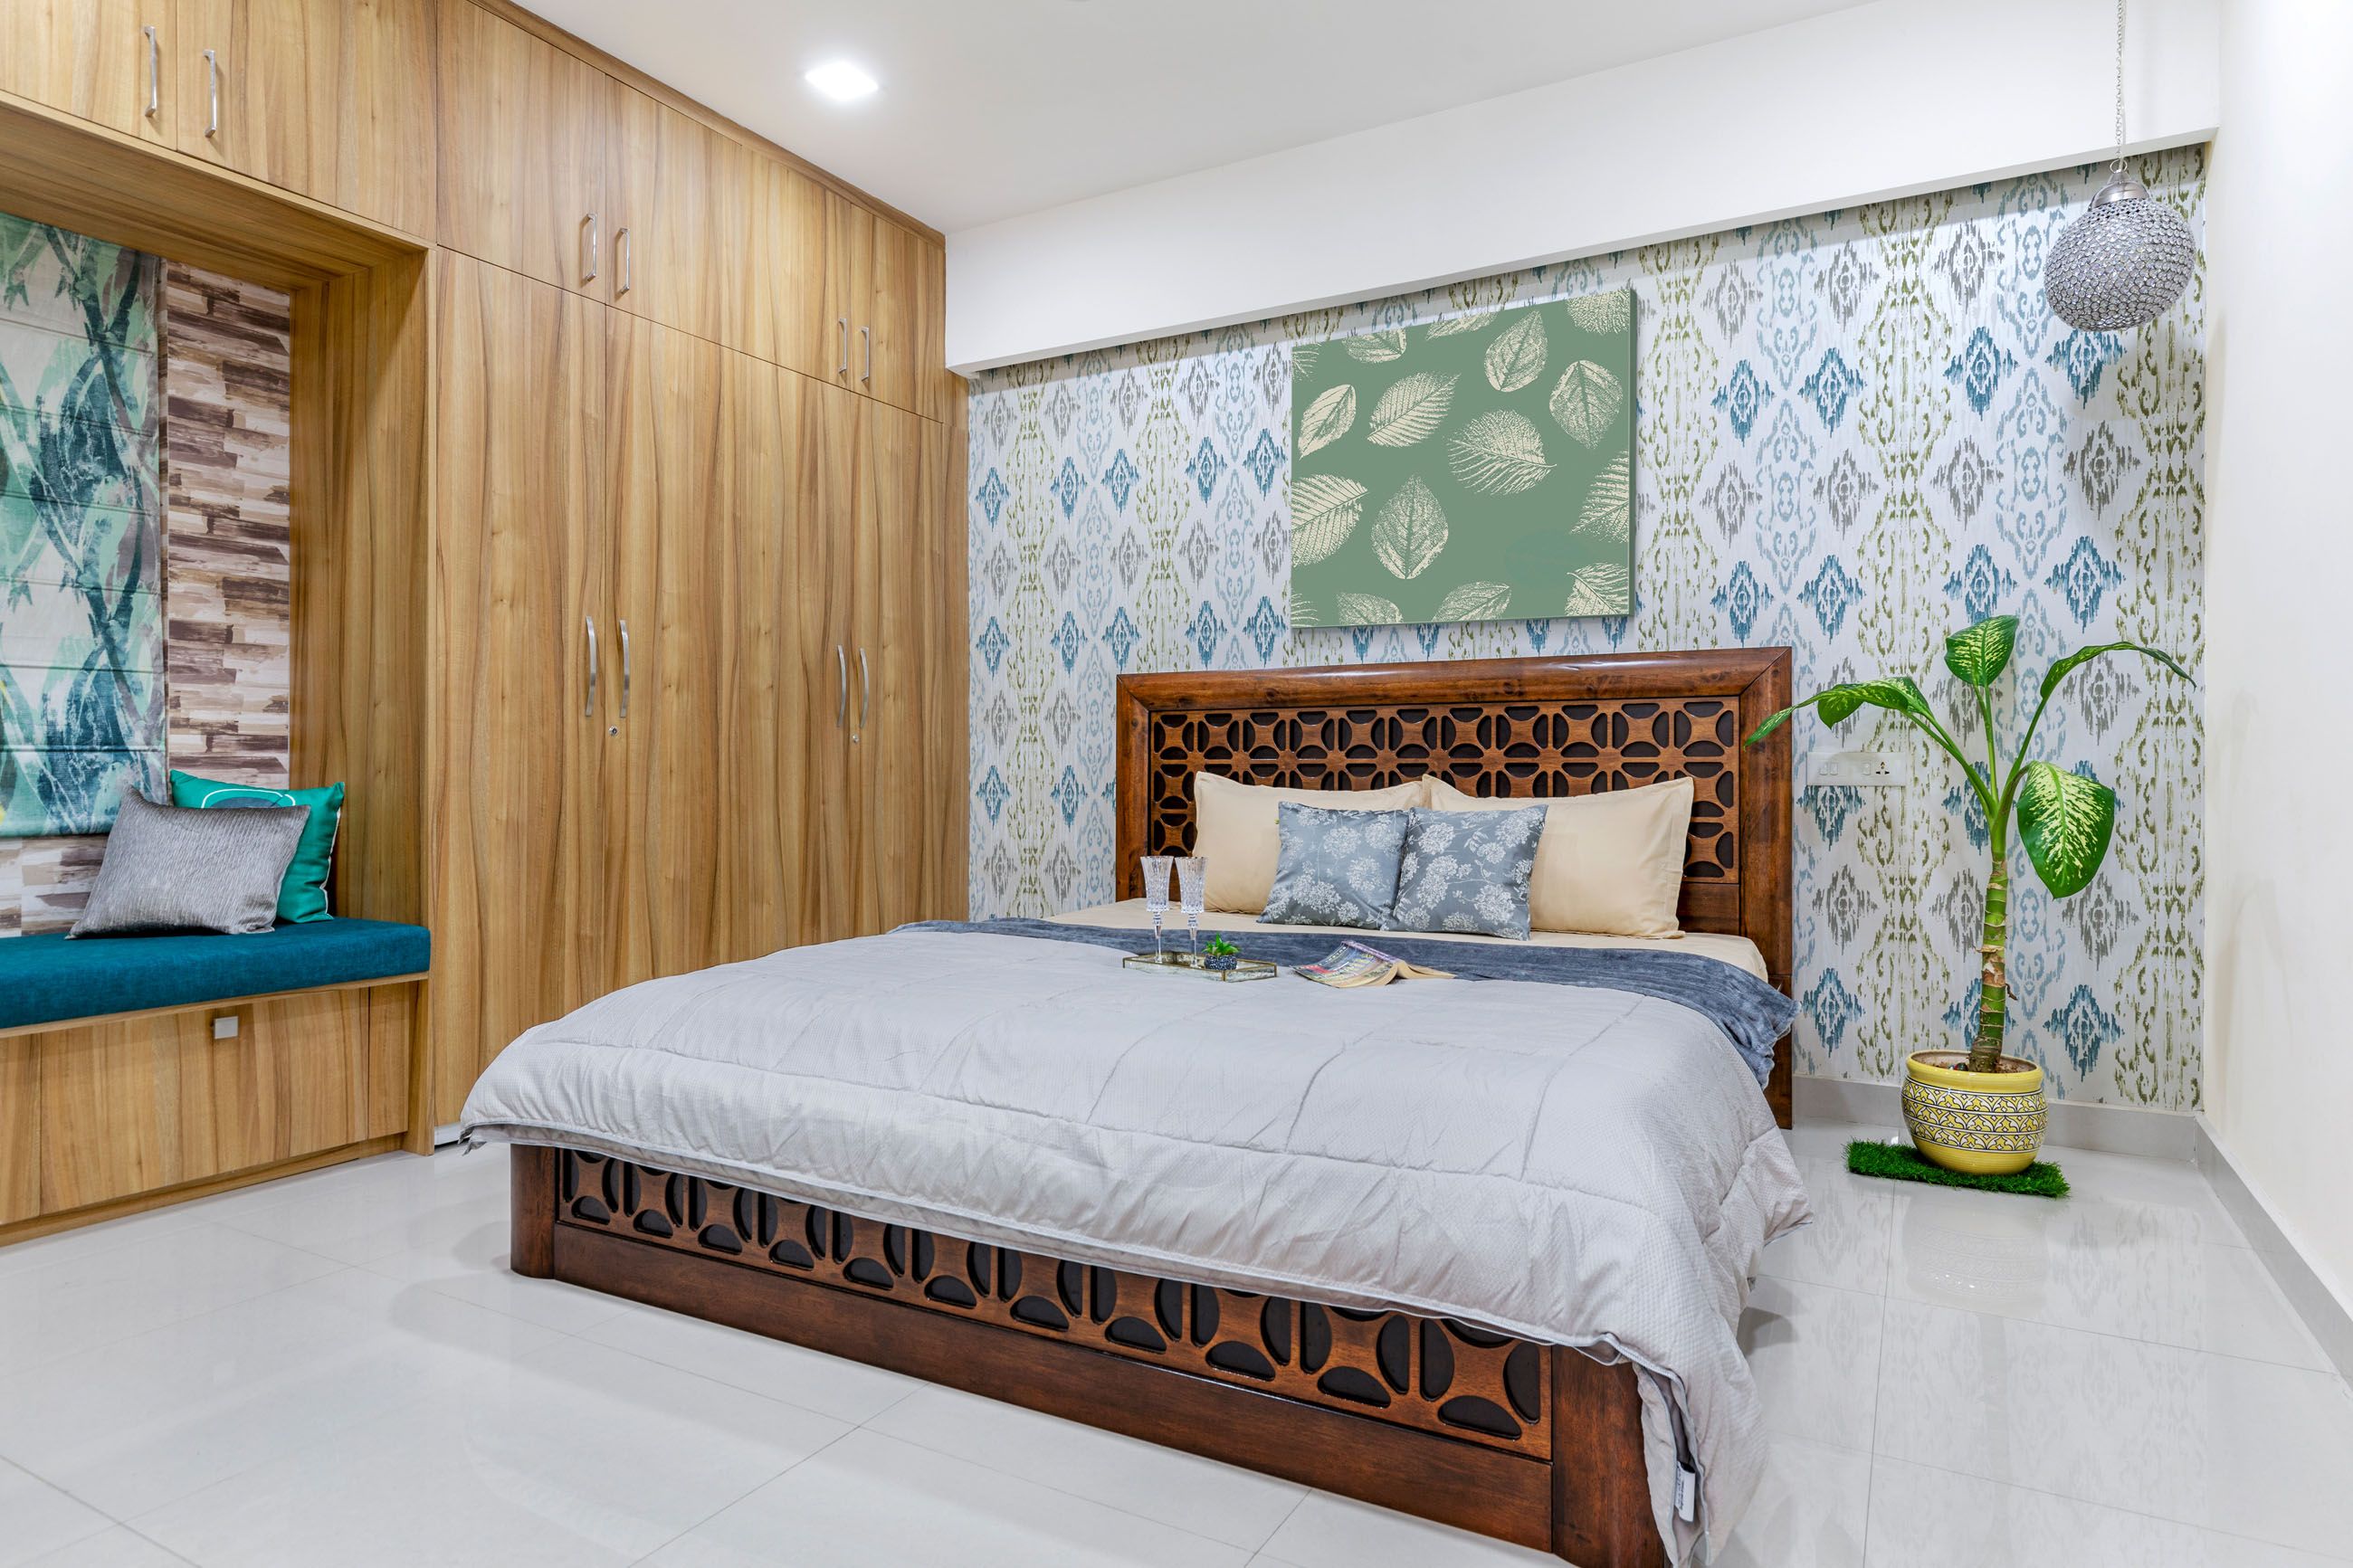 Indian Traditional Guest Room Design With Intricate Wooden Bed